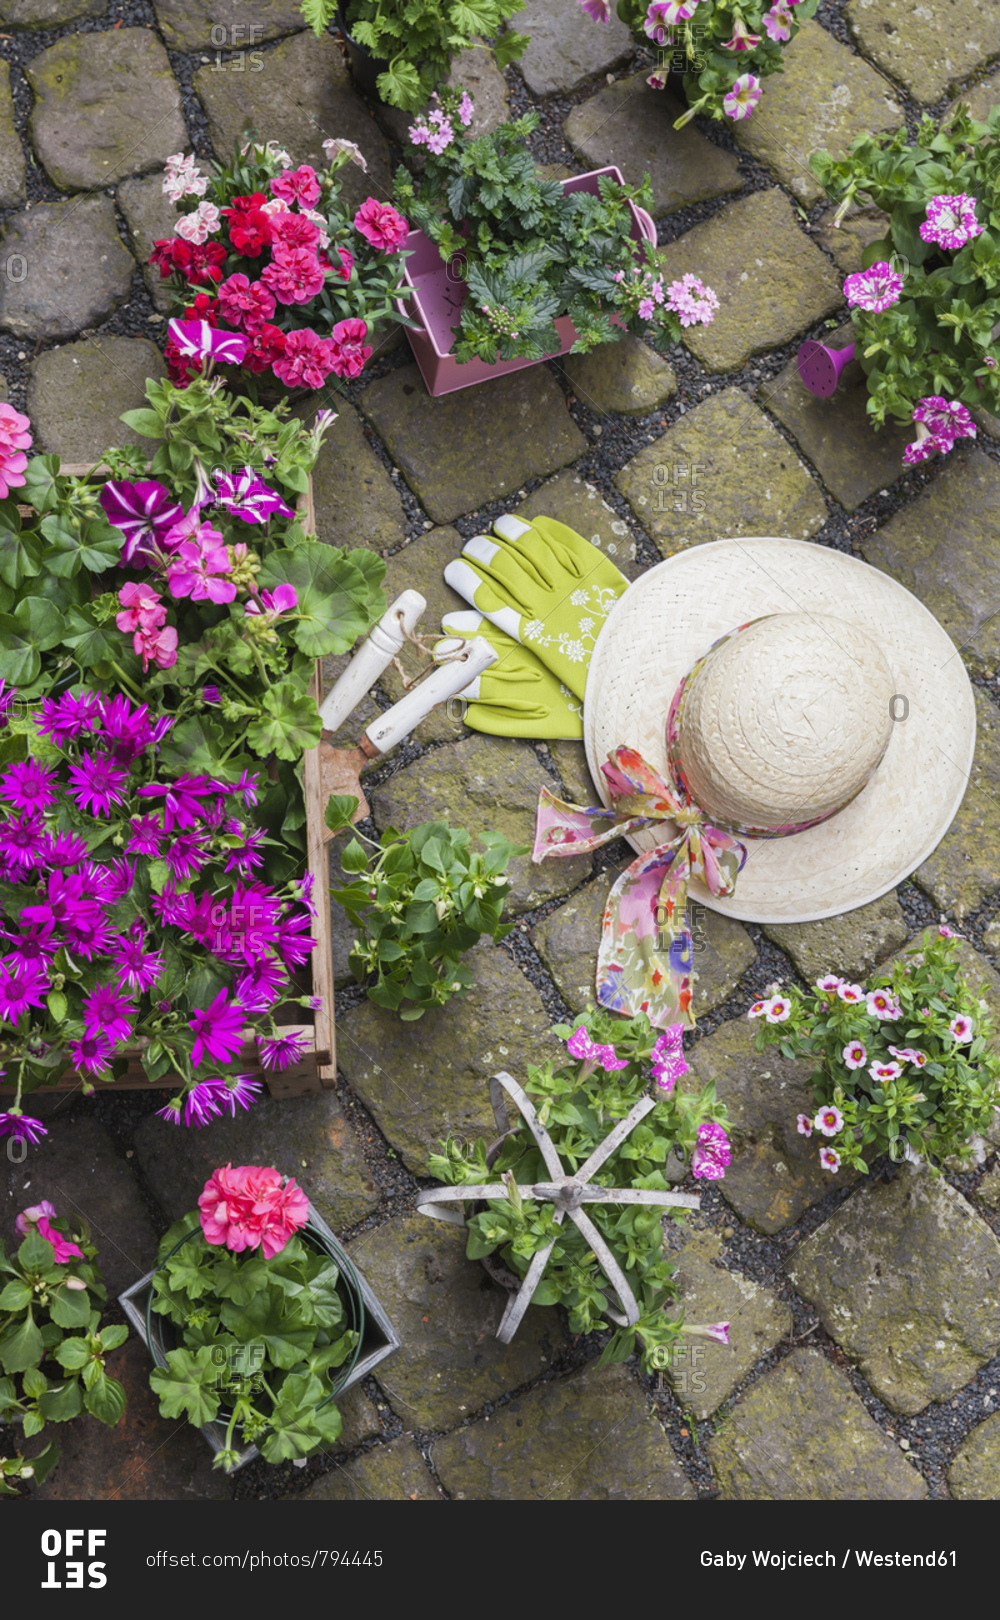 Various potted spring and summer flowers- straw hat- gardening tools and gloves on cabblestone pavement